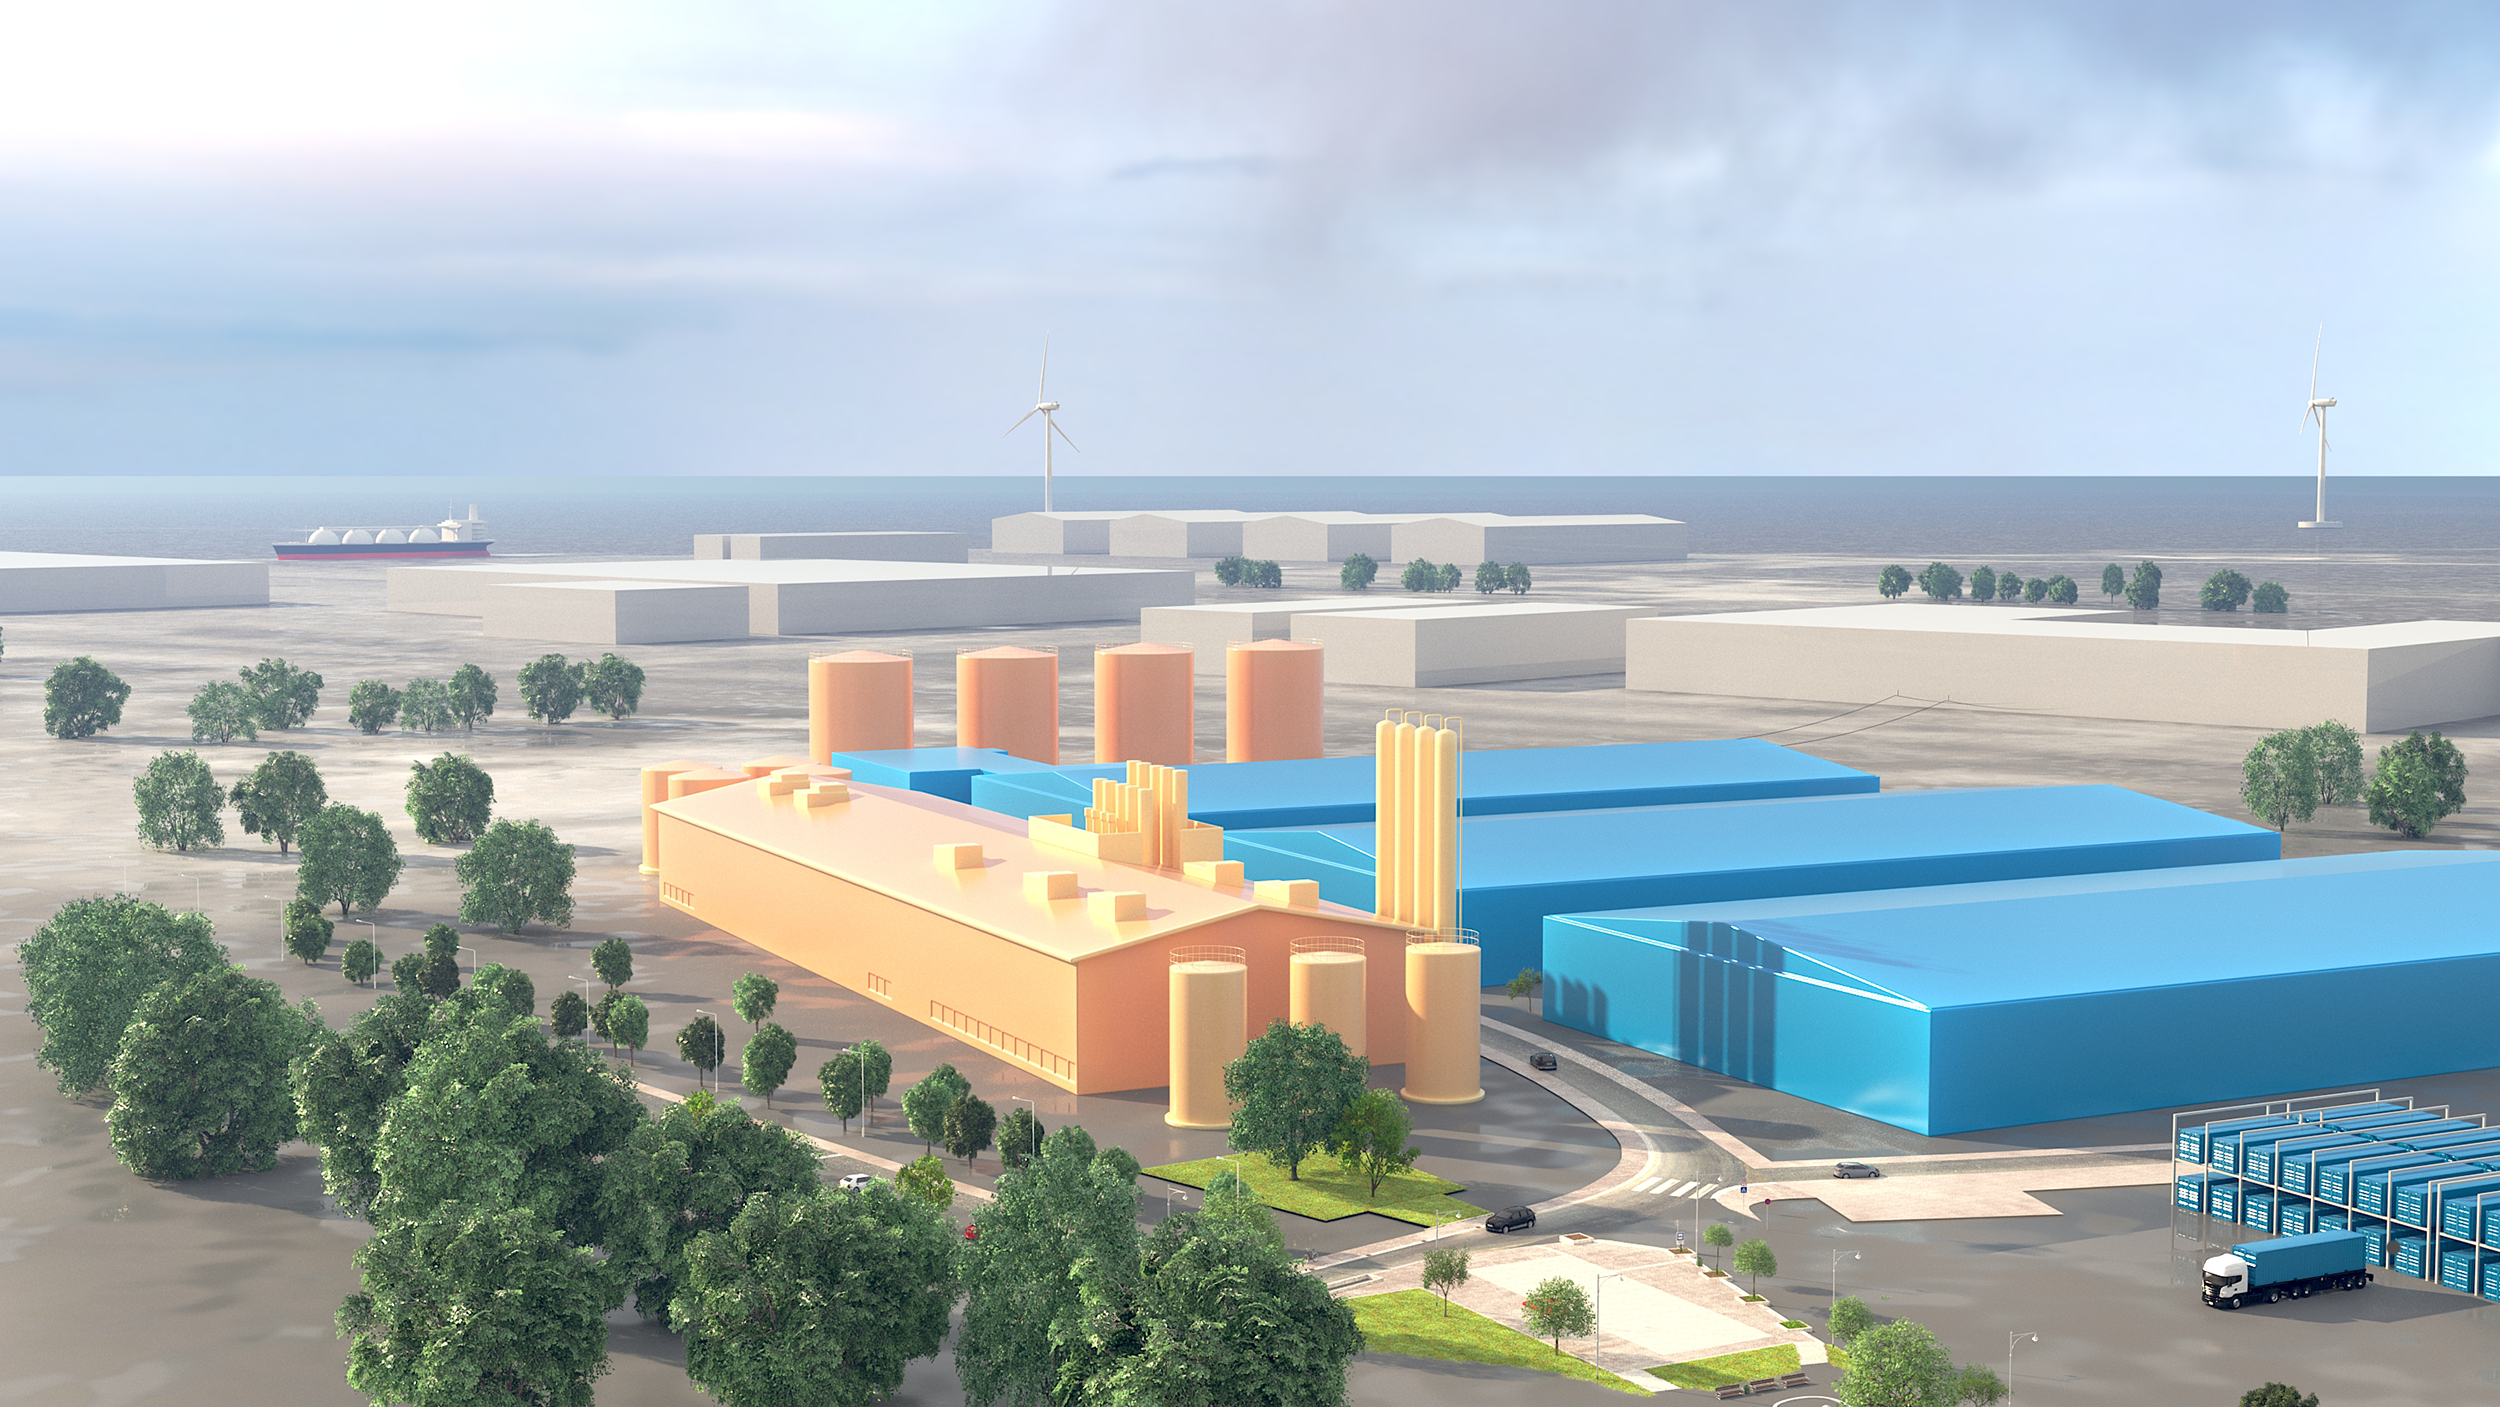 🇫🇮 GREEN NORTH ENERGY TO REPLICATE ITS BUSINESS FINLAND-FUNDED HYDROGEN PLANT CONCEPT IN PORI AND KEMI – AIMING FOR FINLAND’S SELF-SUFFICIENCY IN AMMONIA PRODUCTION